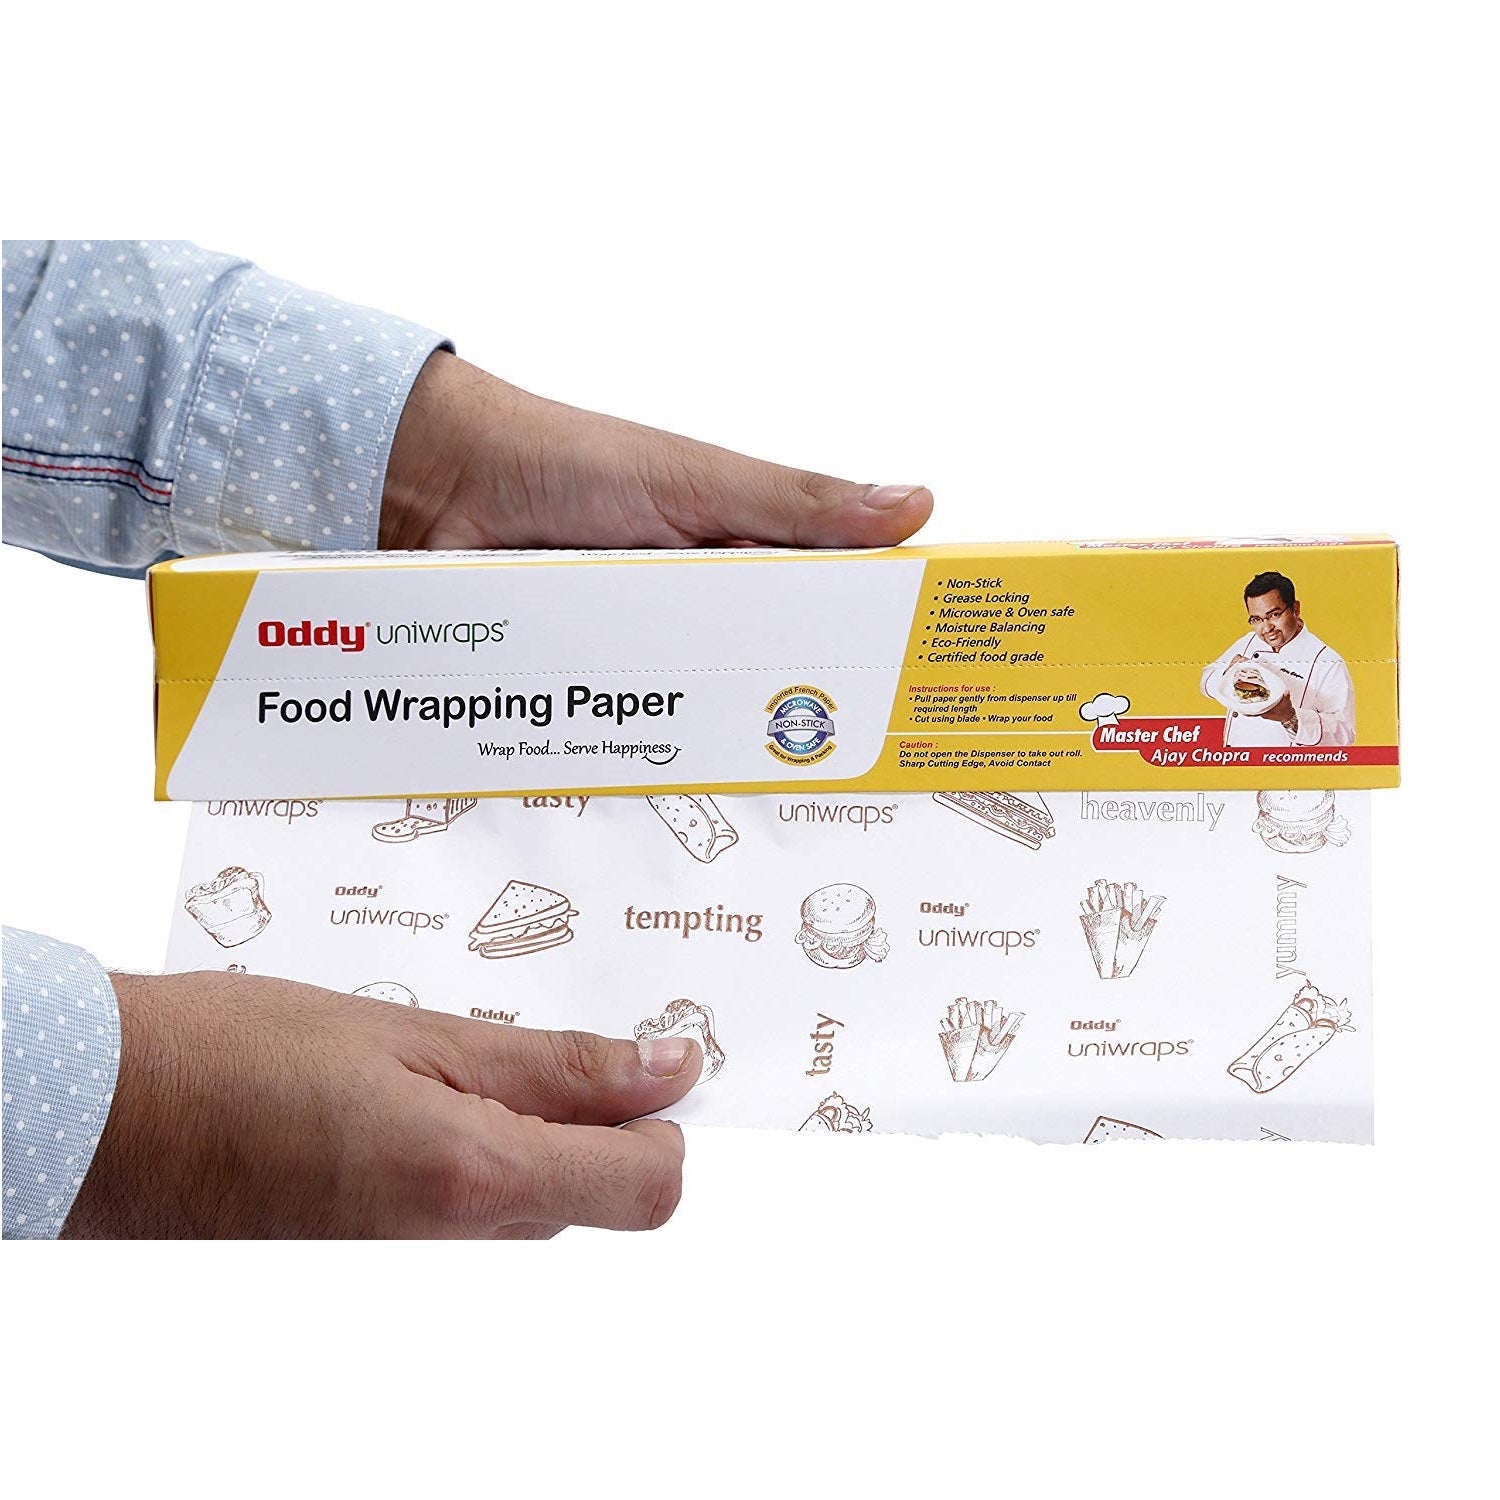 Oddy: Uniwraps Food Wrapping Paper 11-Inch x 20-Meters